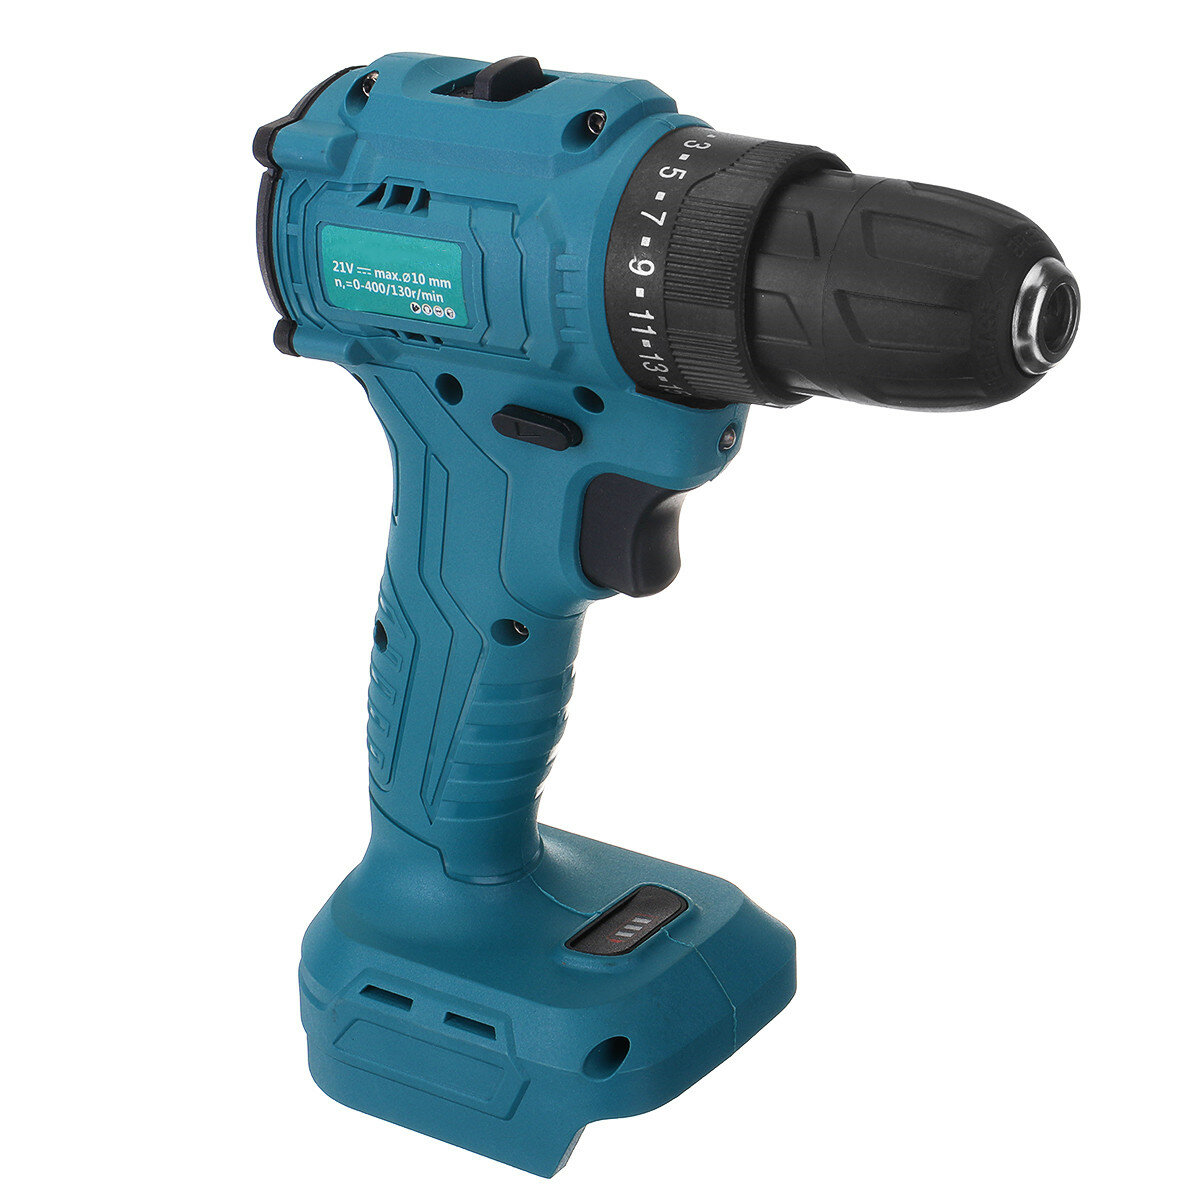 

25 Torque 2 Speeds Brushless Cordless Electric Drill Impact Wrench For 21V Battery